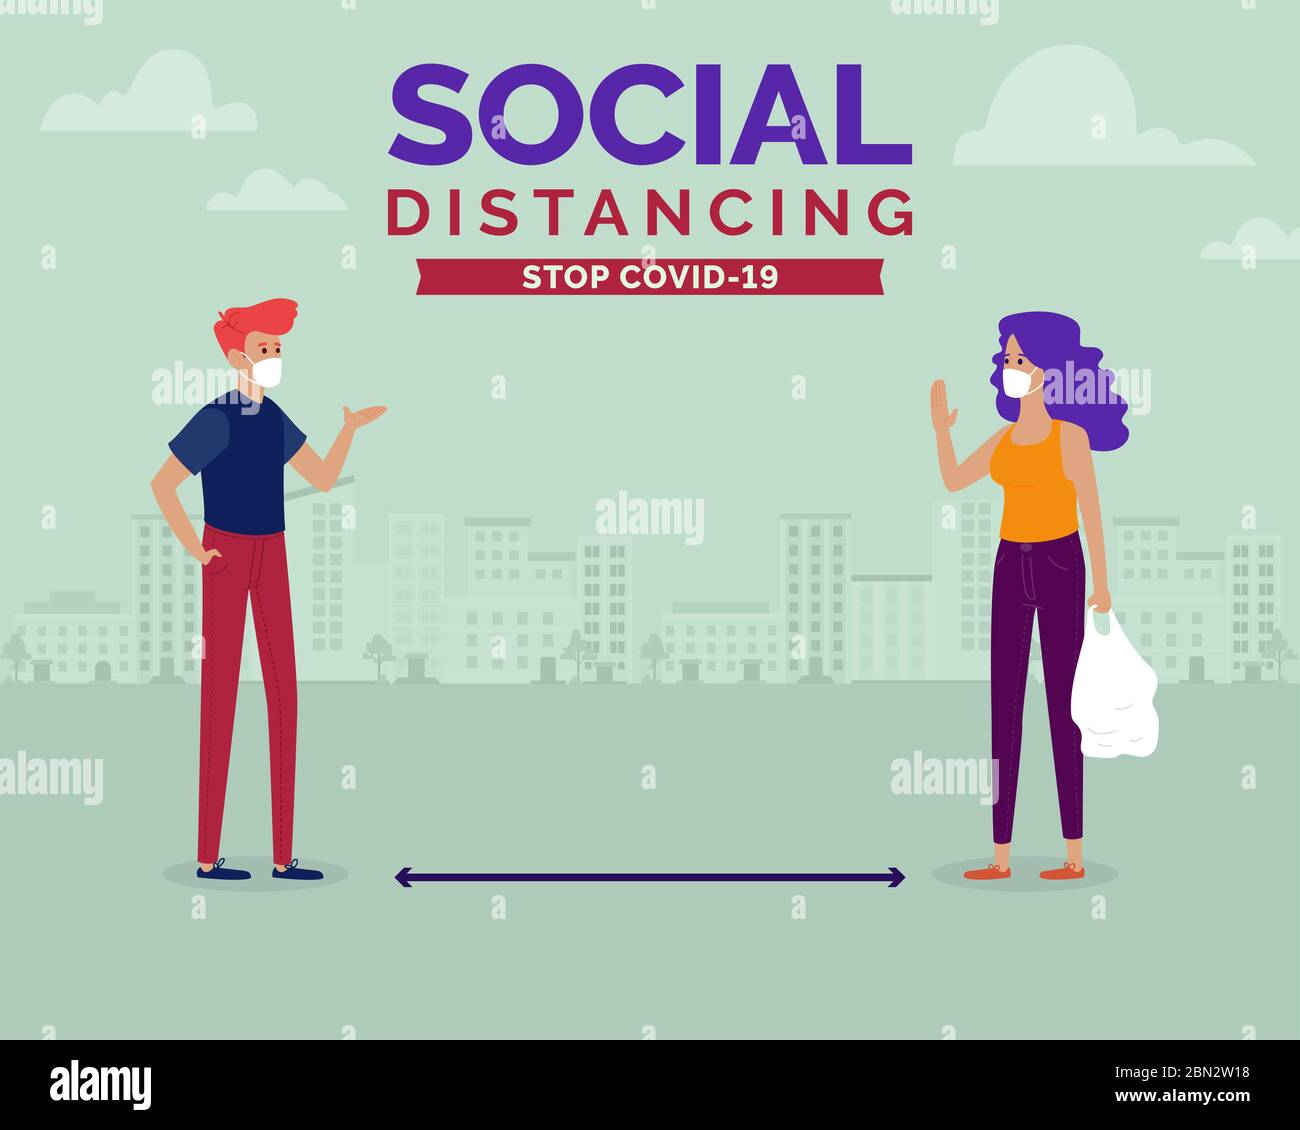 Vector illustration of social distancing concept. A man and a woman keeping a safe distance to fight the coronavirus. Stop covid-19 Stock Photo